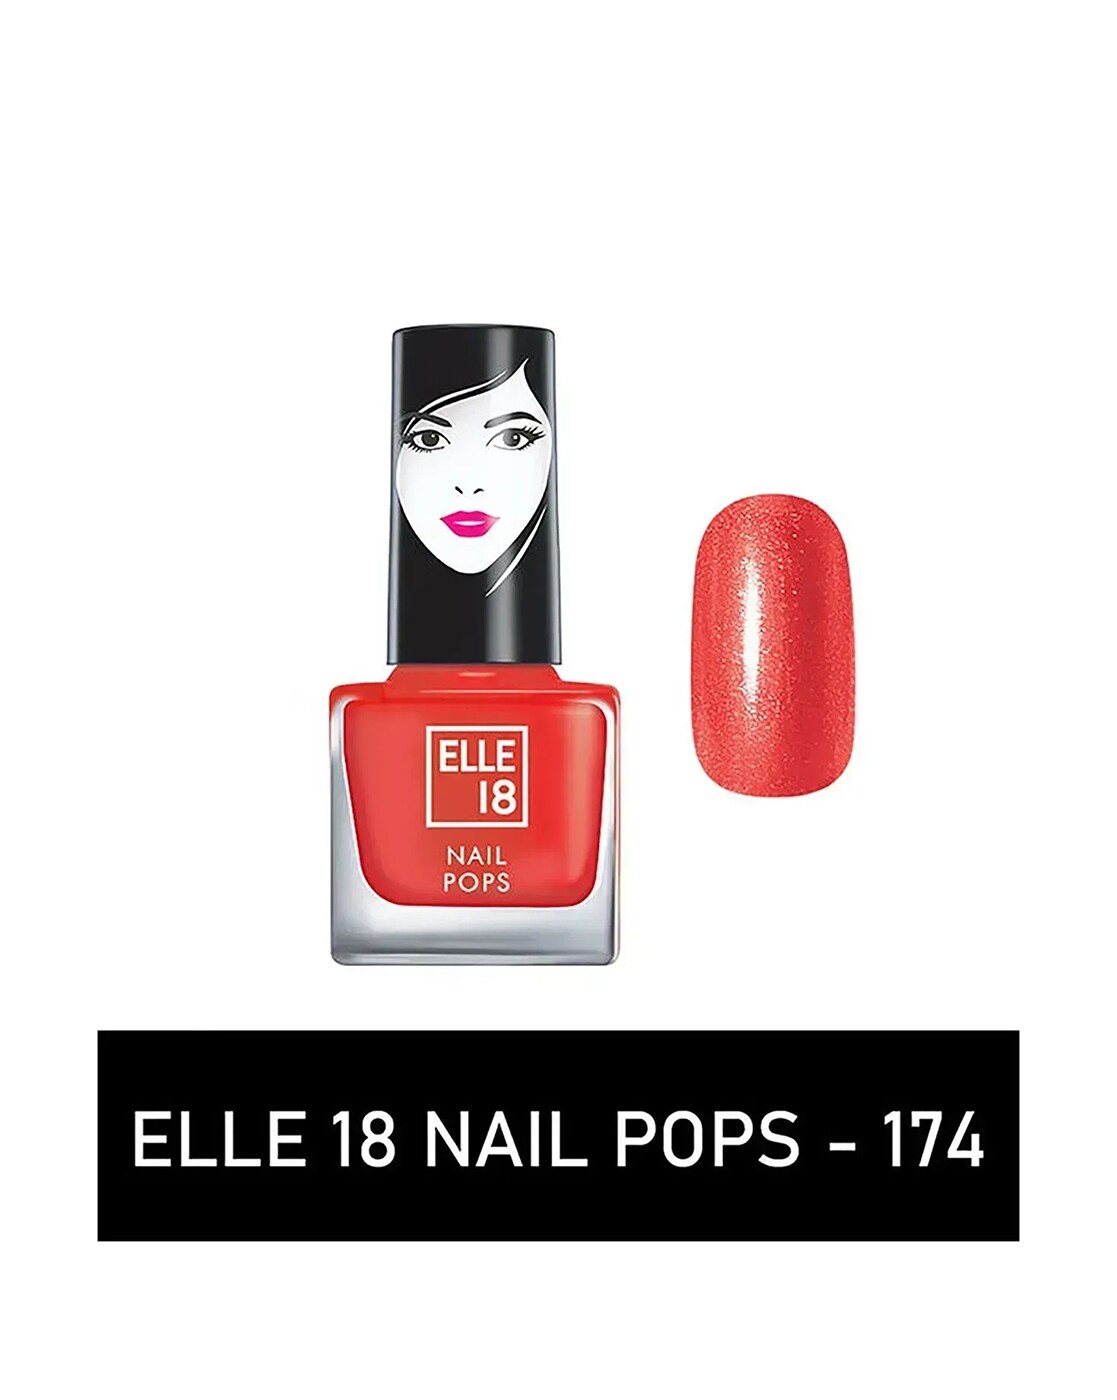 ELLE 18 NAIL POPS 114 – Makeup and Beauty Gallery